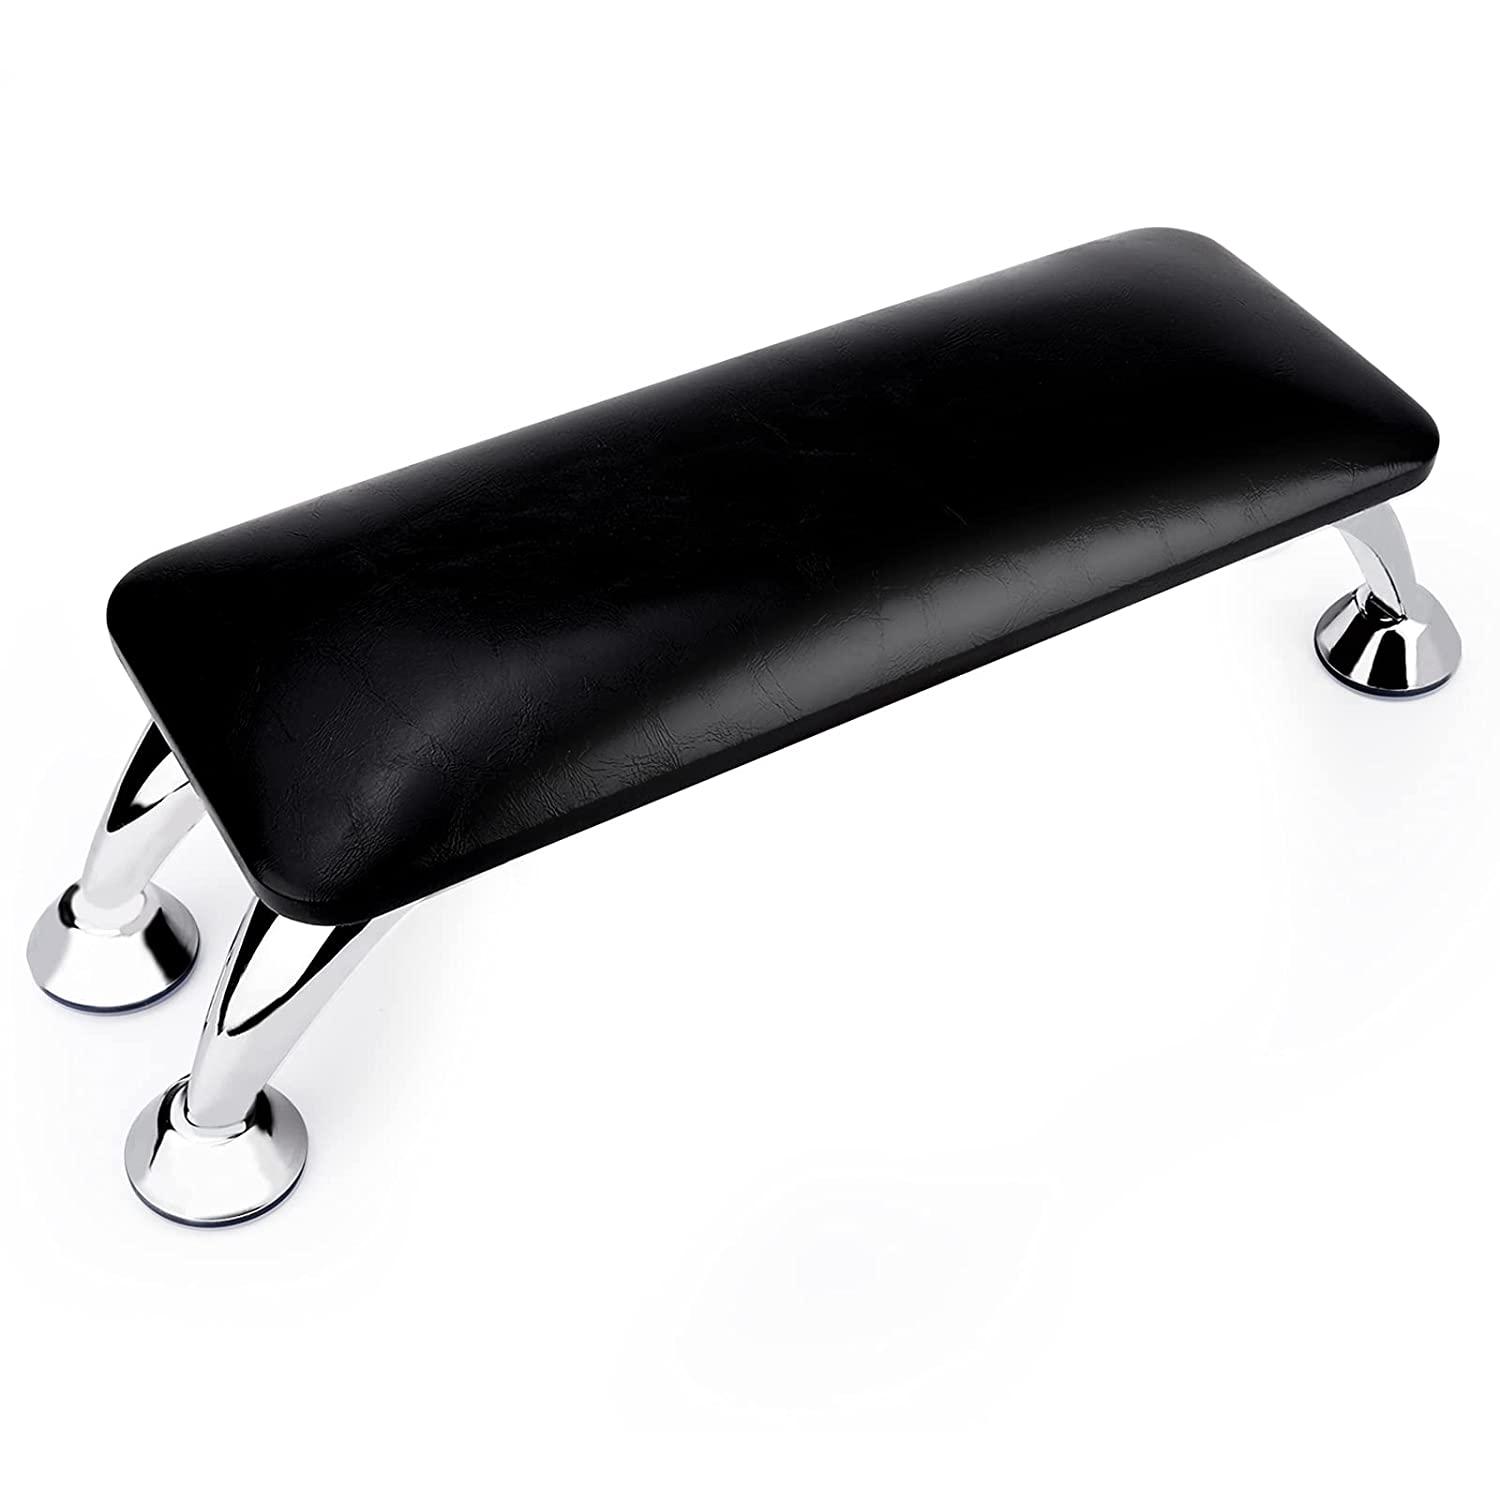 Nail Arm Rest for Acrylic Nails with Nail Table Mat, Microfiber Leather  Nail Hand Rest Cushion for Nails, Soft Hand Pillow Footstool with Foldable